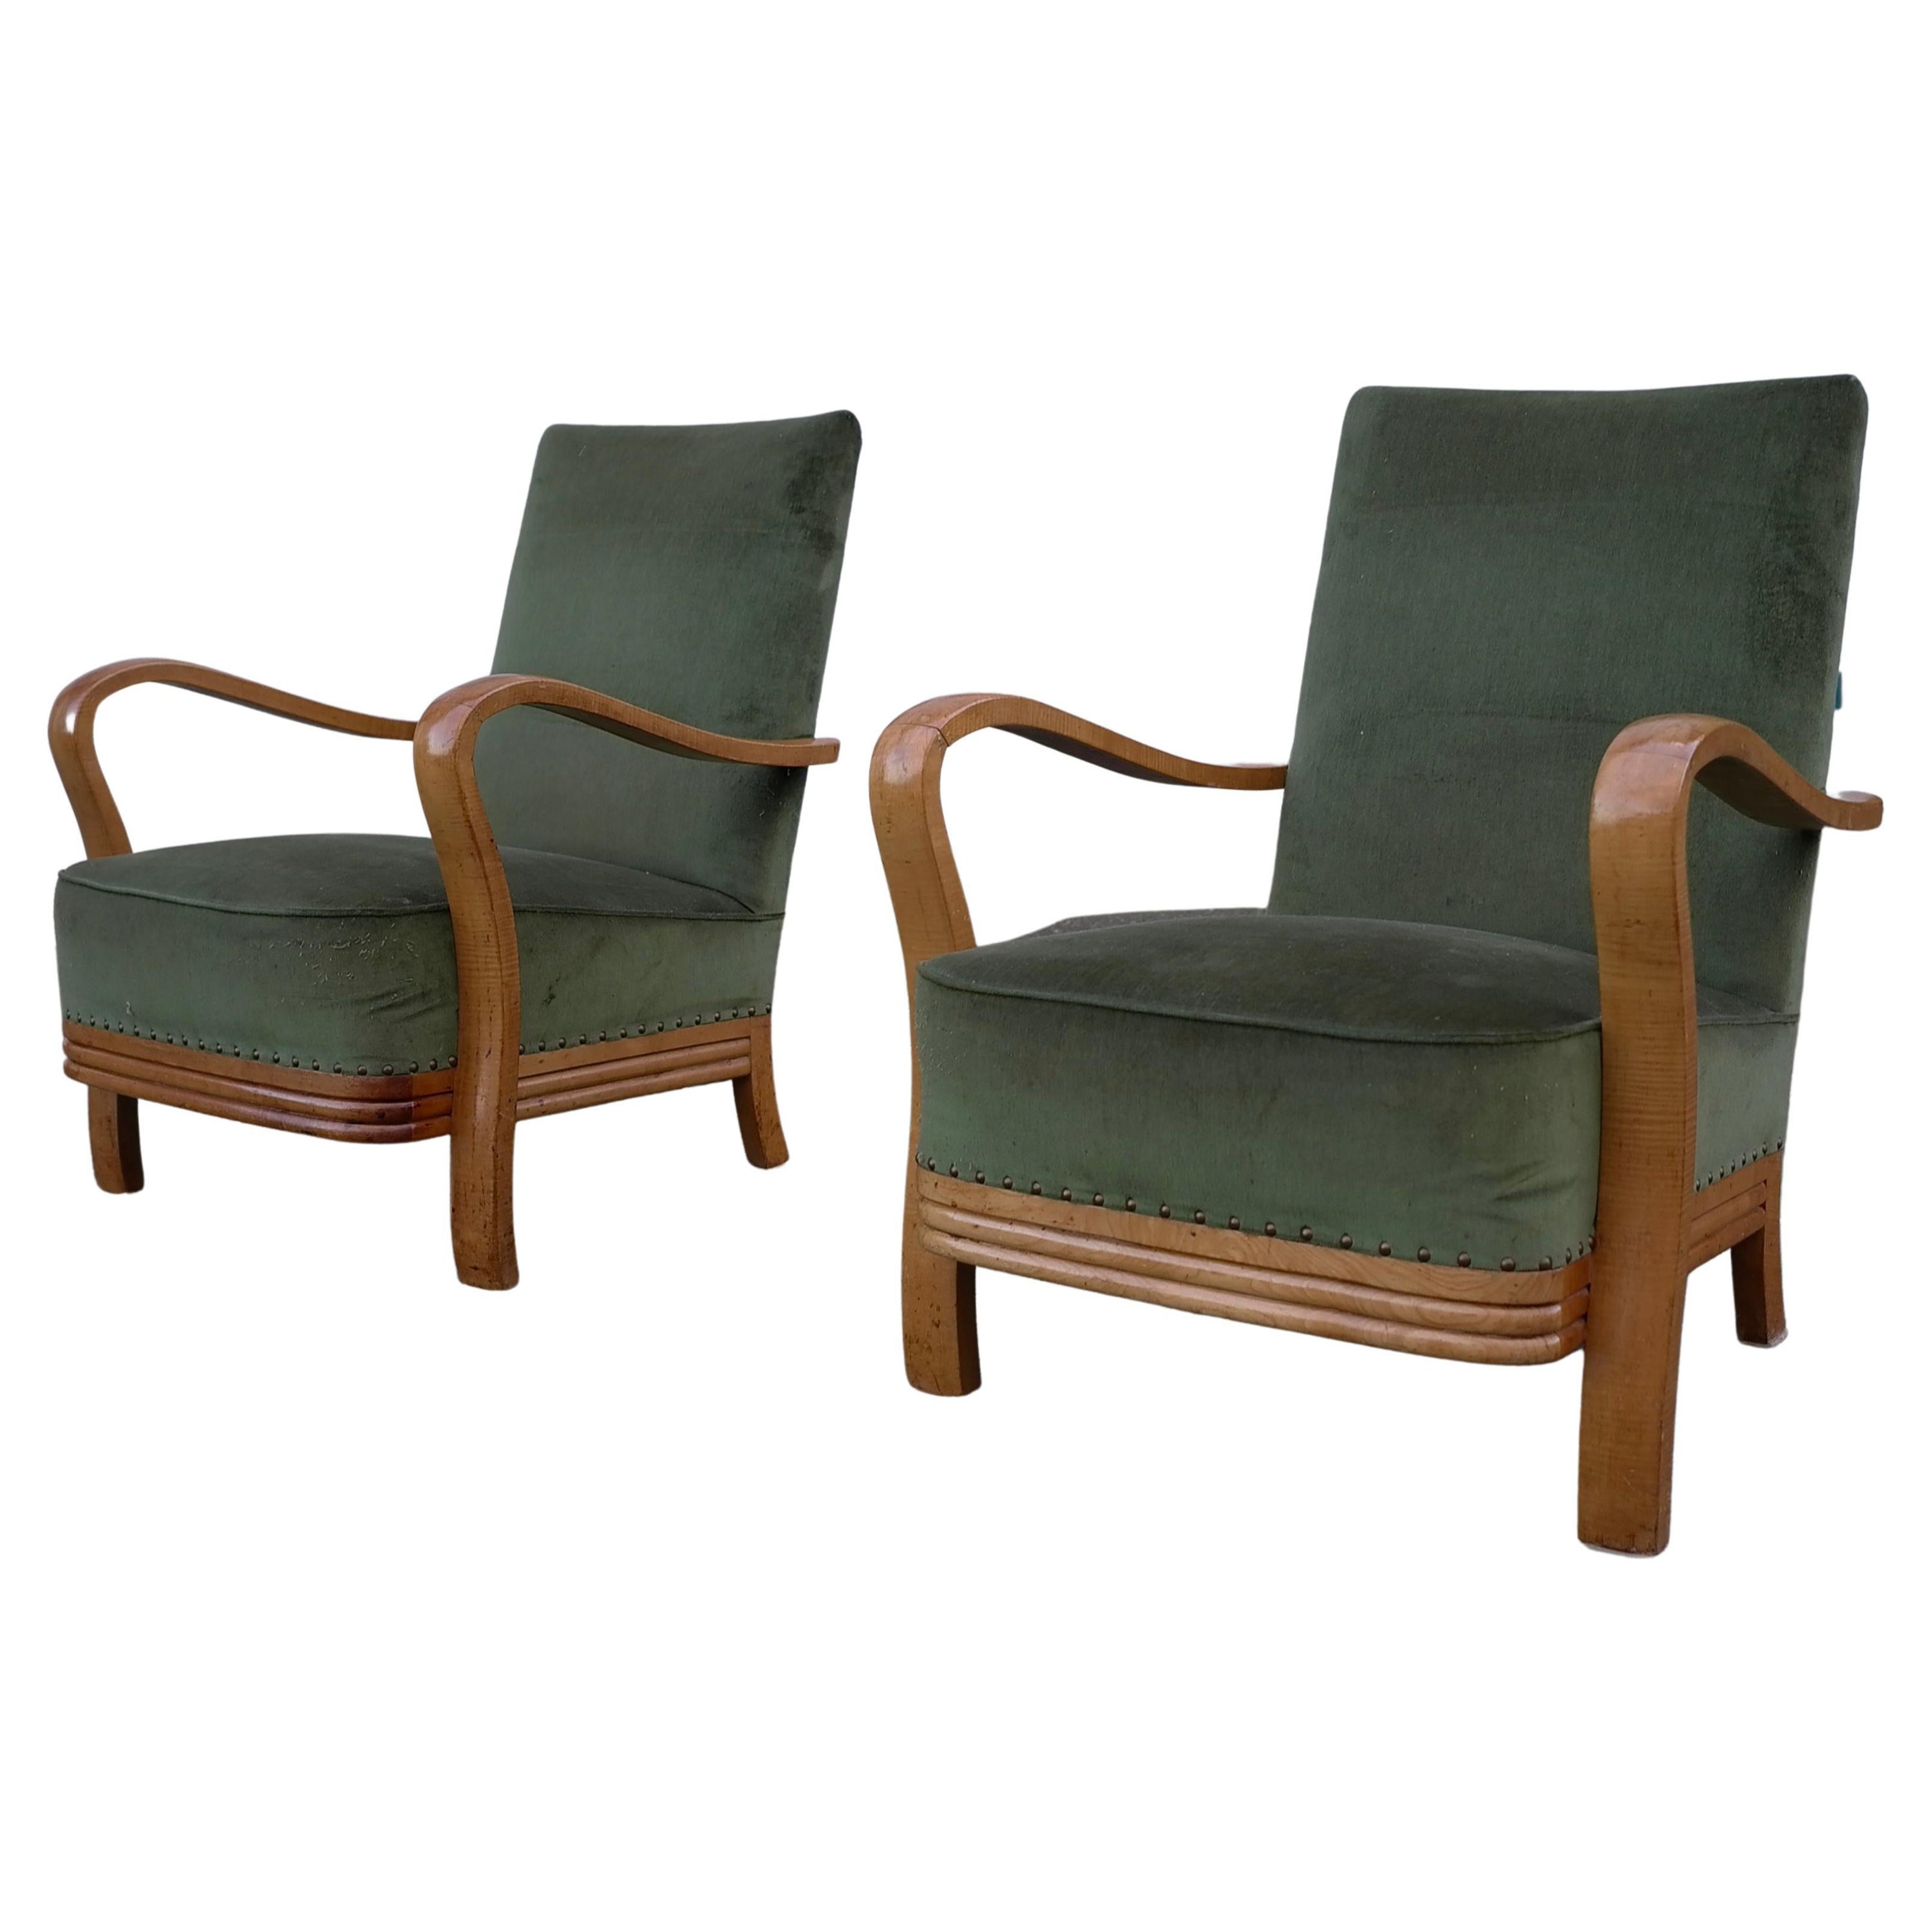 Pair of Wooden Curved Arms Art-Deco Armchairs, France, 1940s